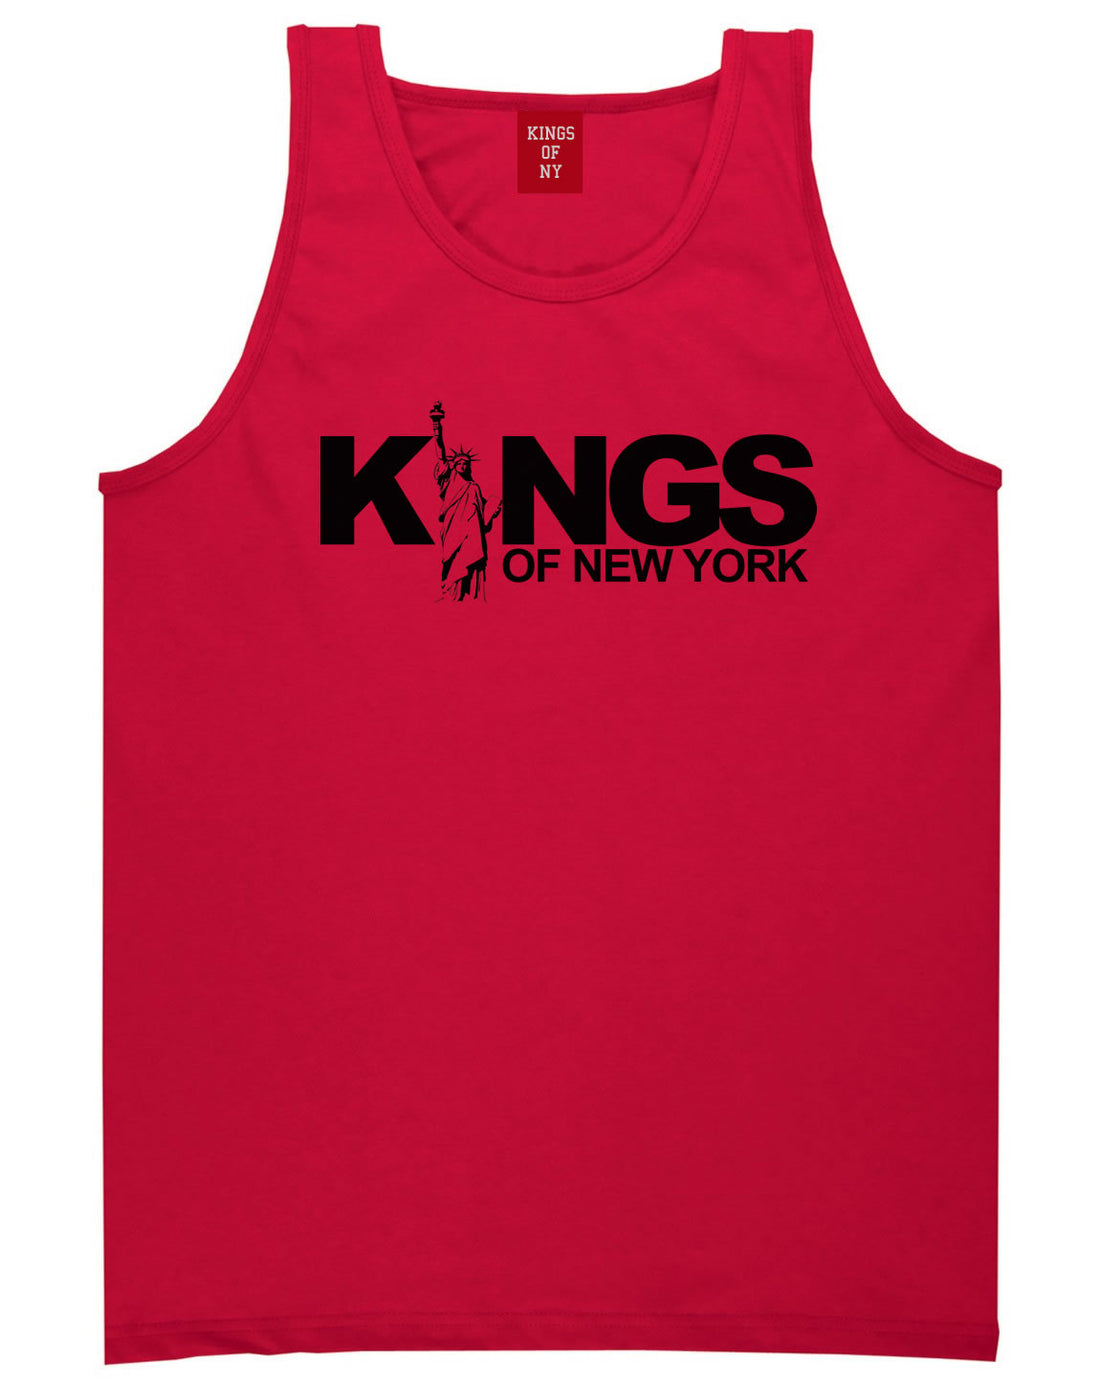 KINGS Lady Liberty Logo Tank Top in Red by Kings Of NY